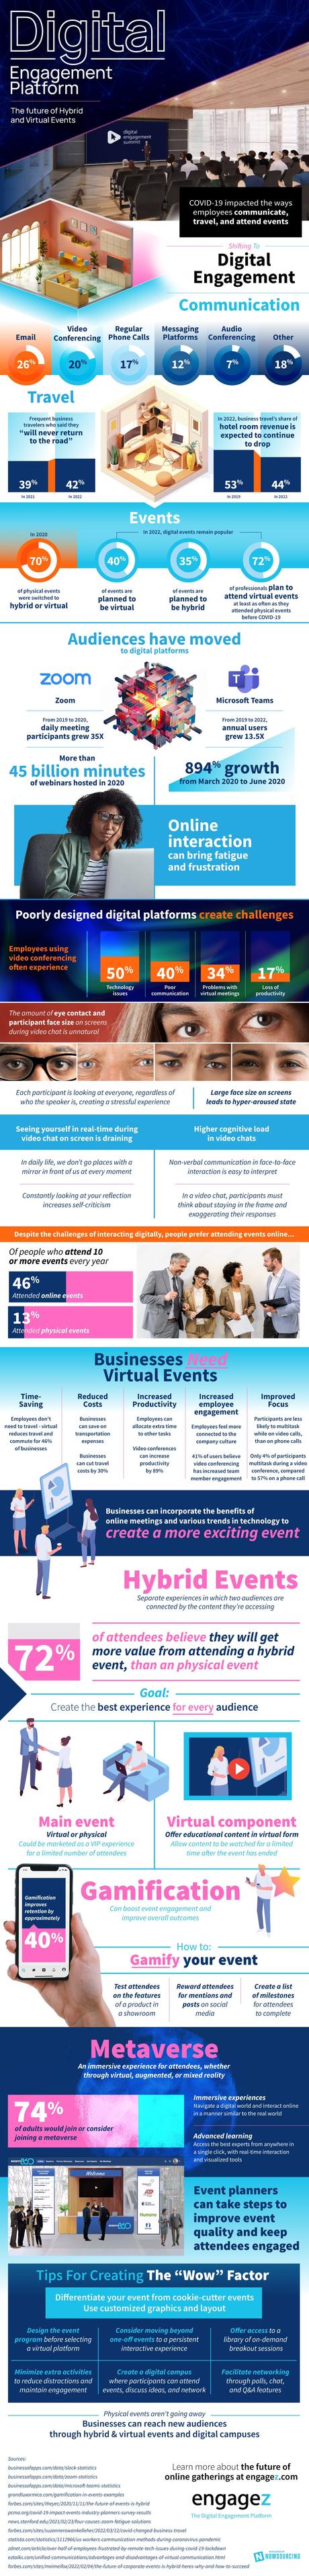 The power of virtual events